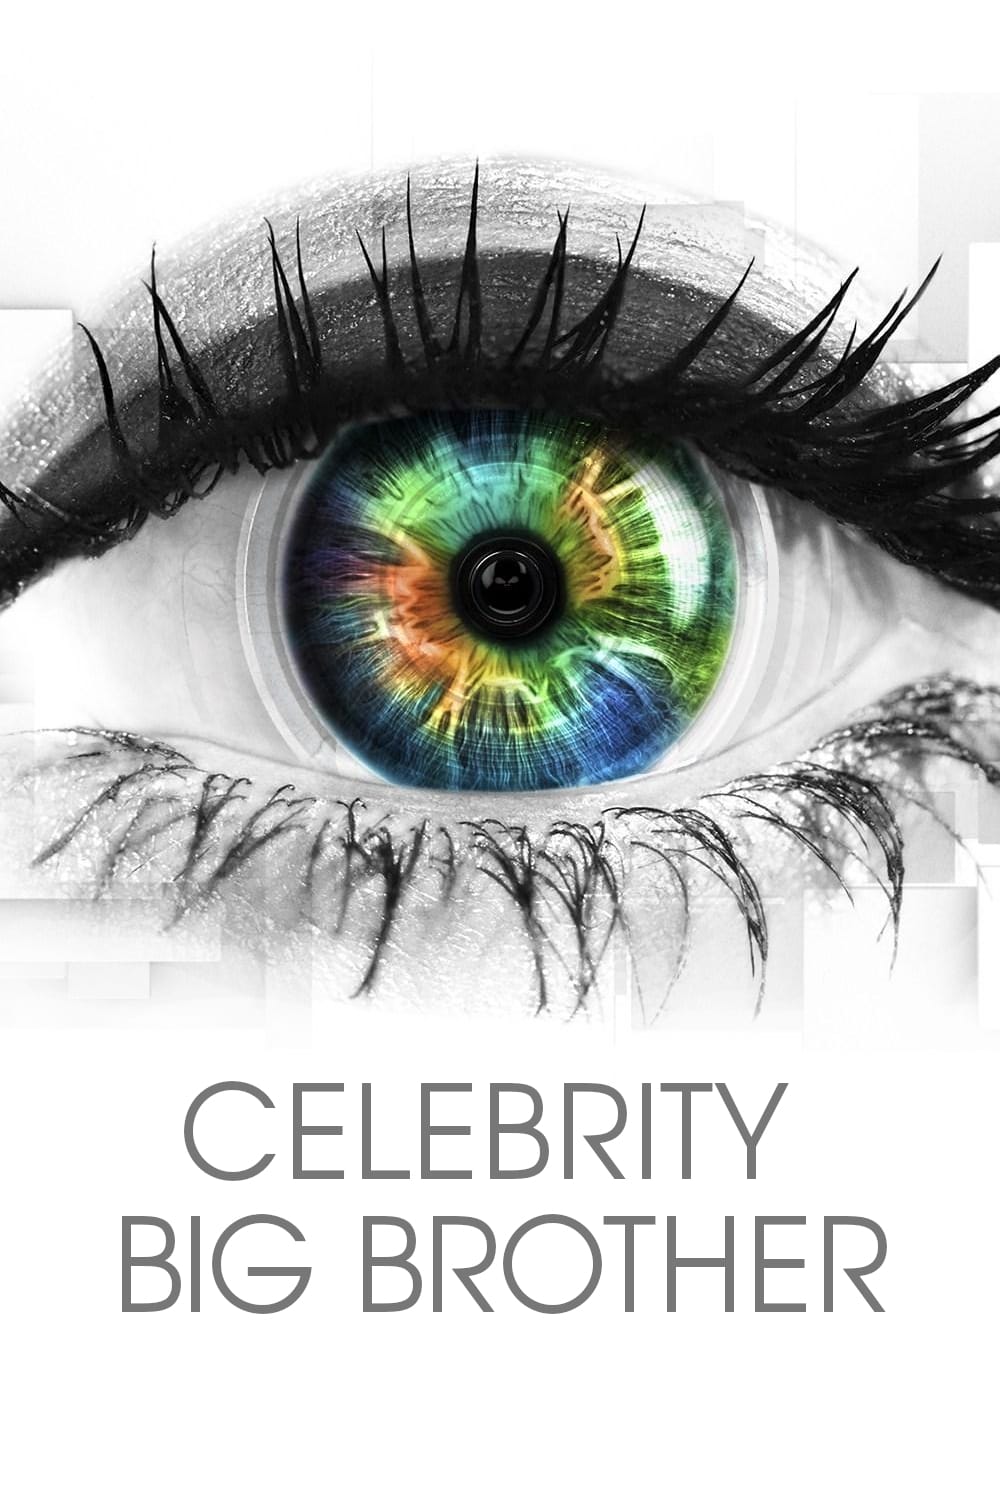 Celebrity Big Brother TV Shows About Surveillance